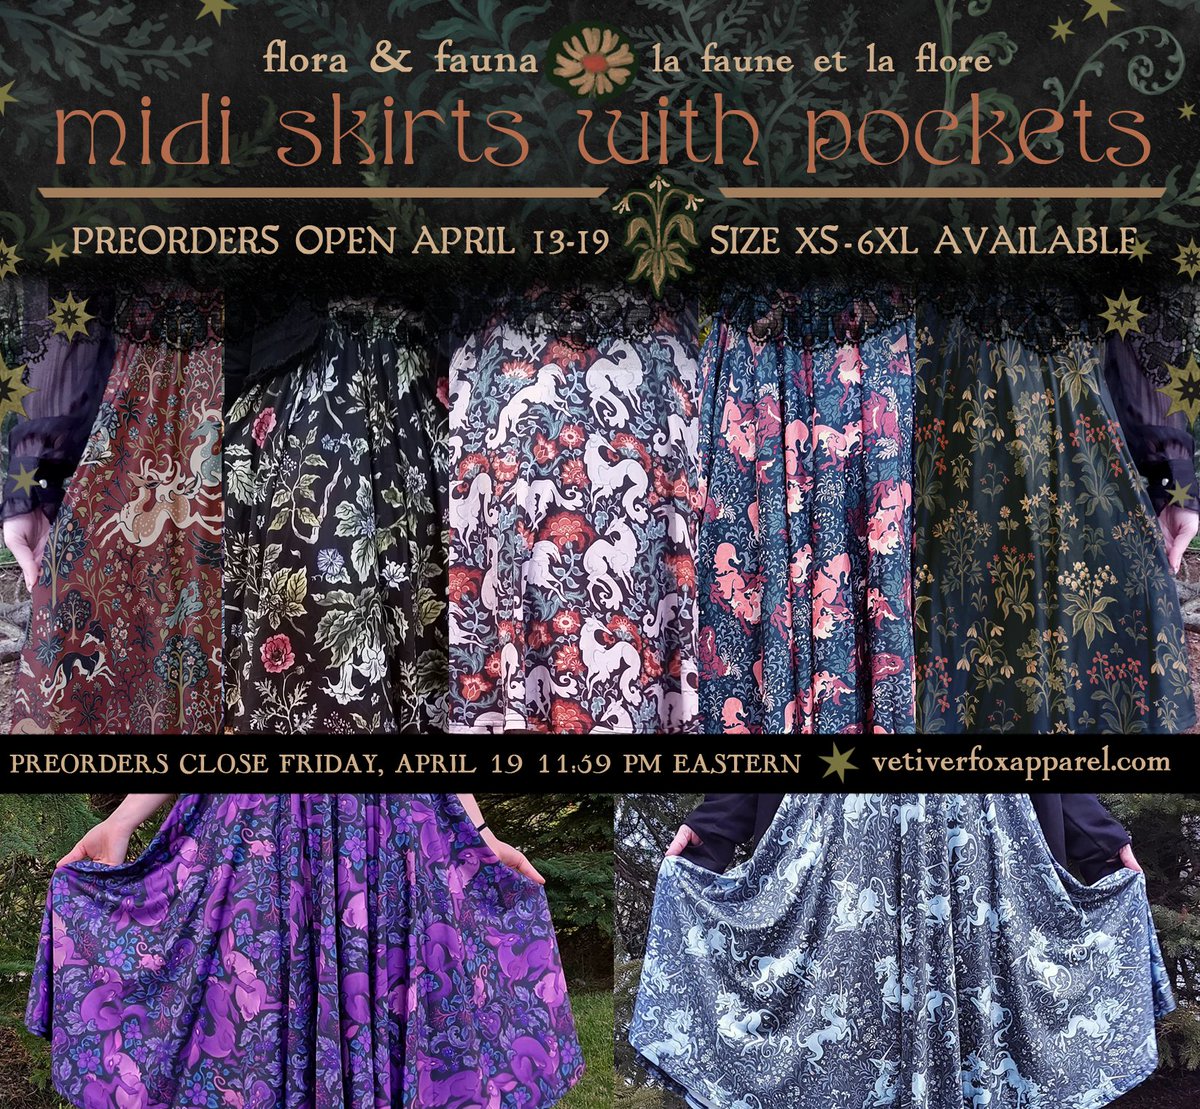 Midi skirt preorders are open now through Friday, April 19 at vetiverfoxapparel🖤com !! Thanks so much for looking! As always, shares & rts are very much appreciated! 🌷🦌🌹